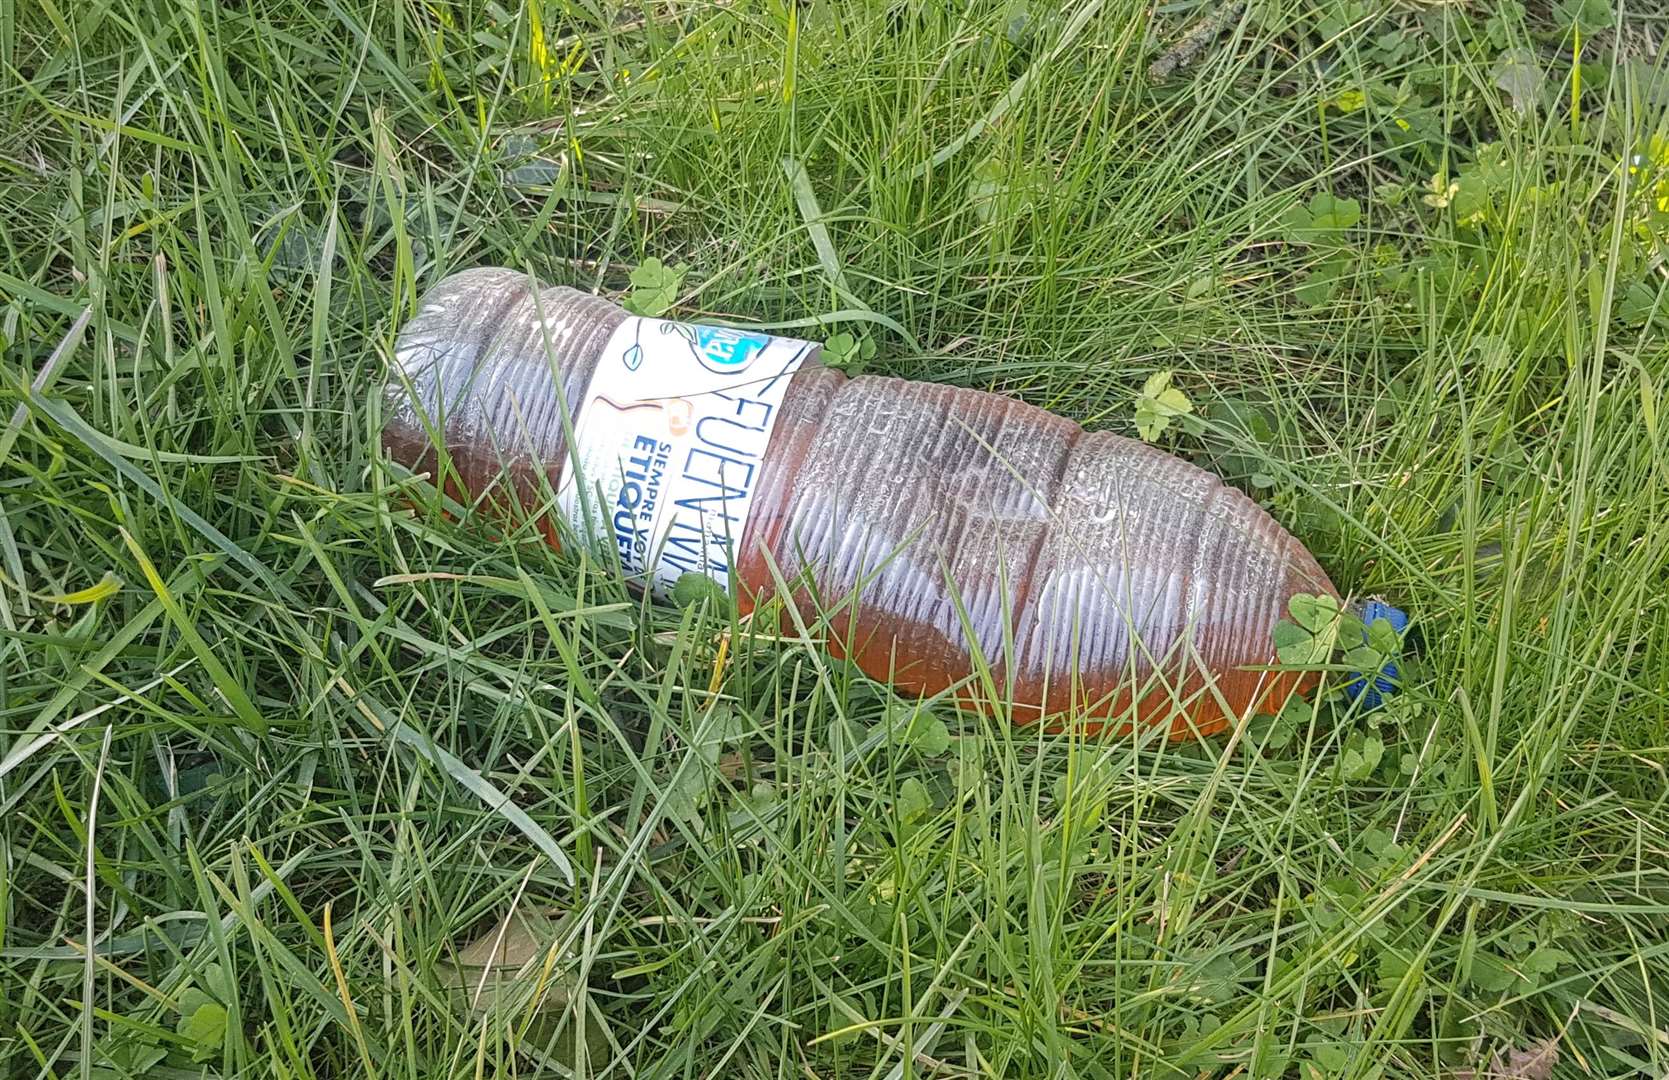 Bottles of urine are also a common sight along the industrial estate stretch of Pike Road